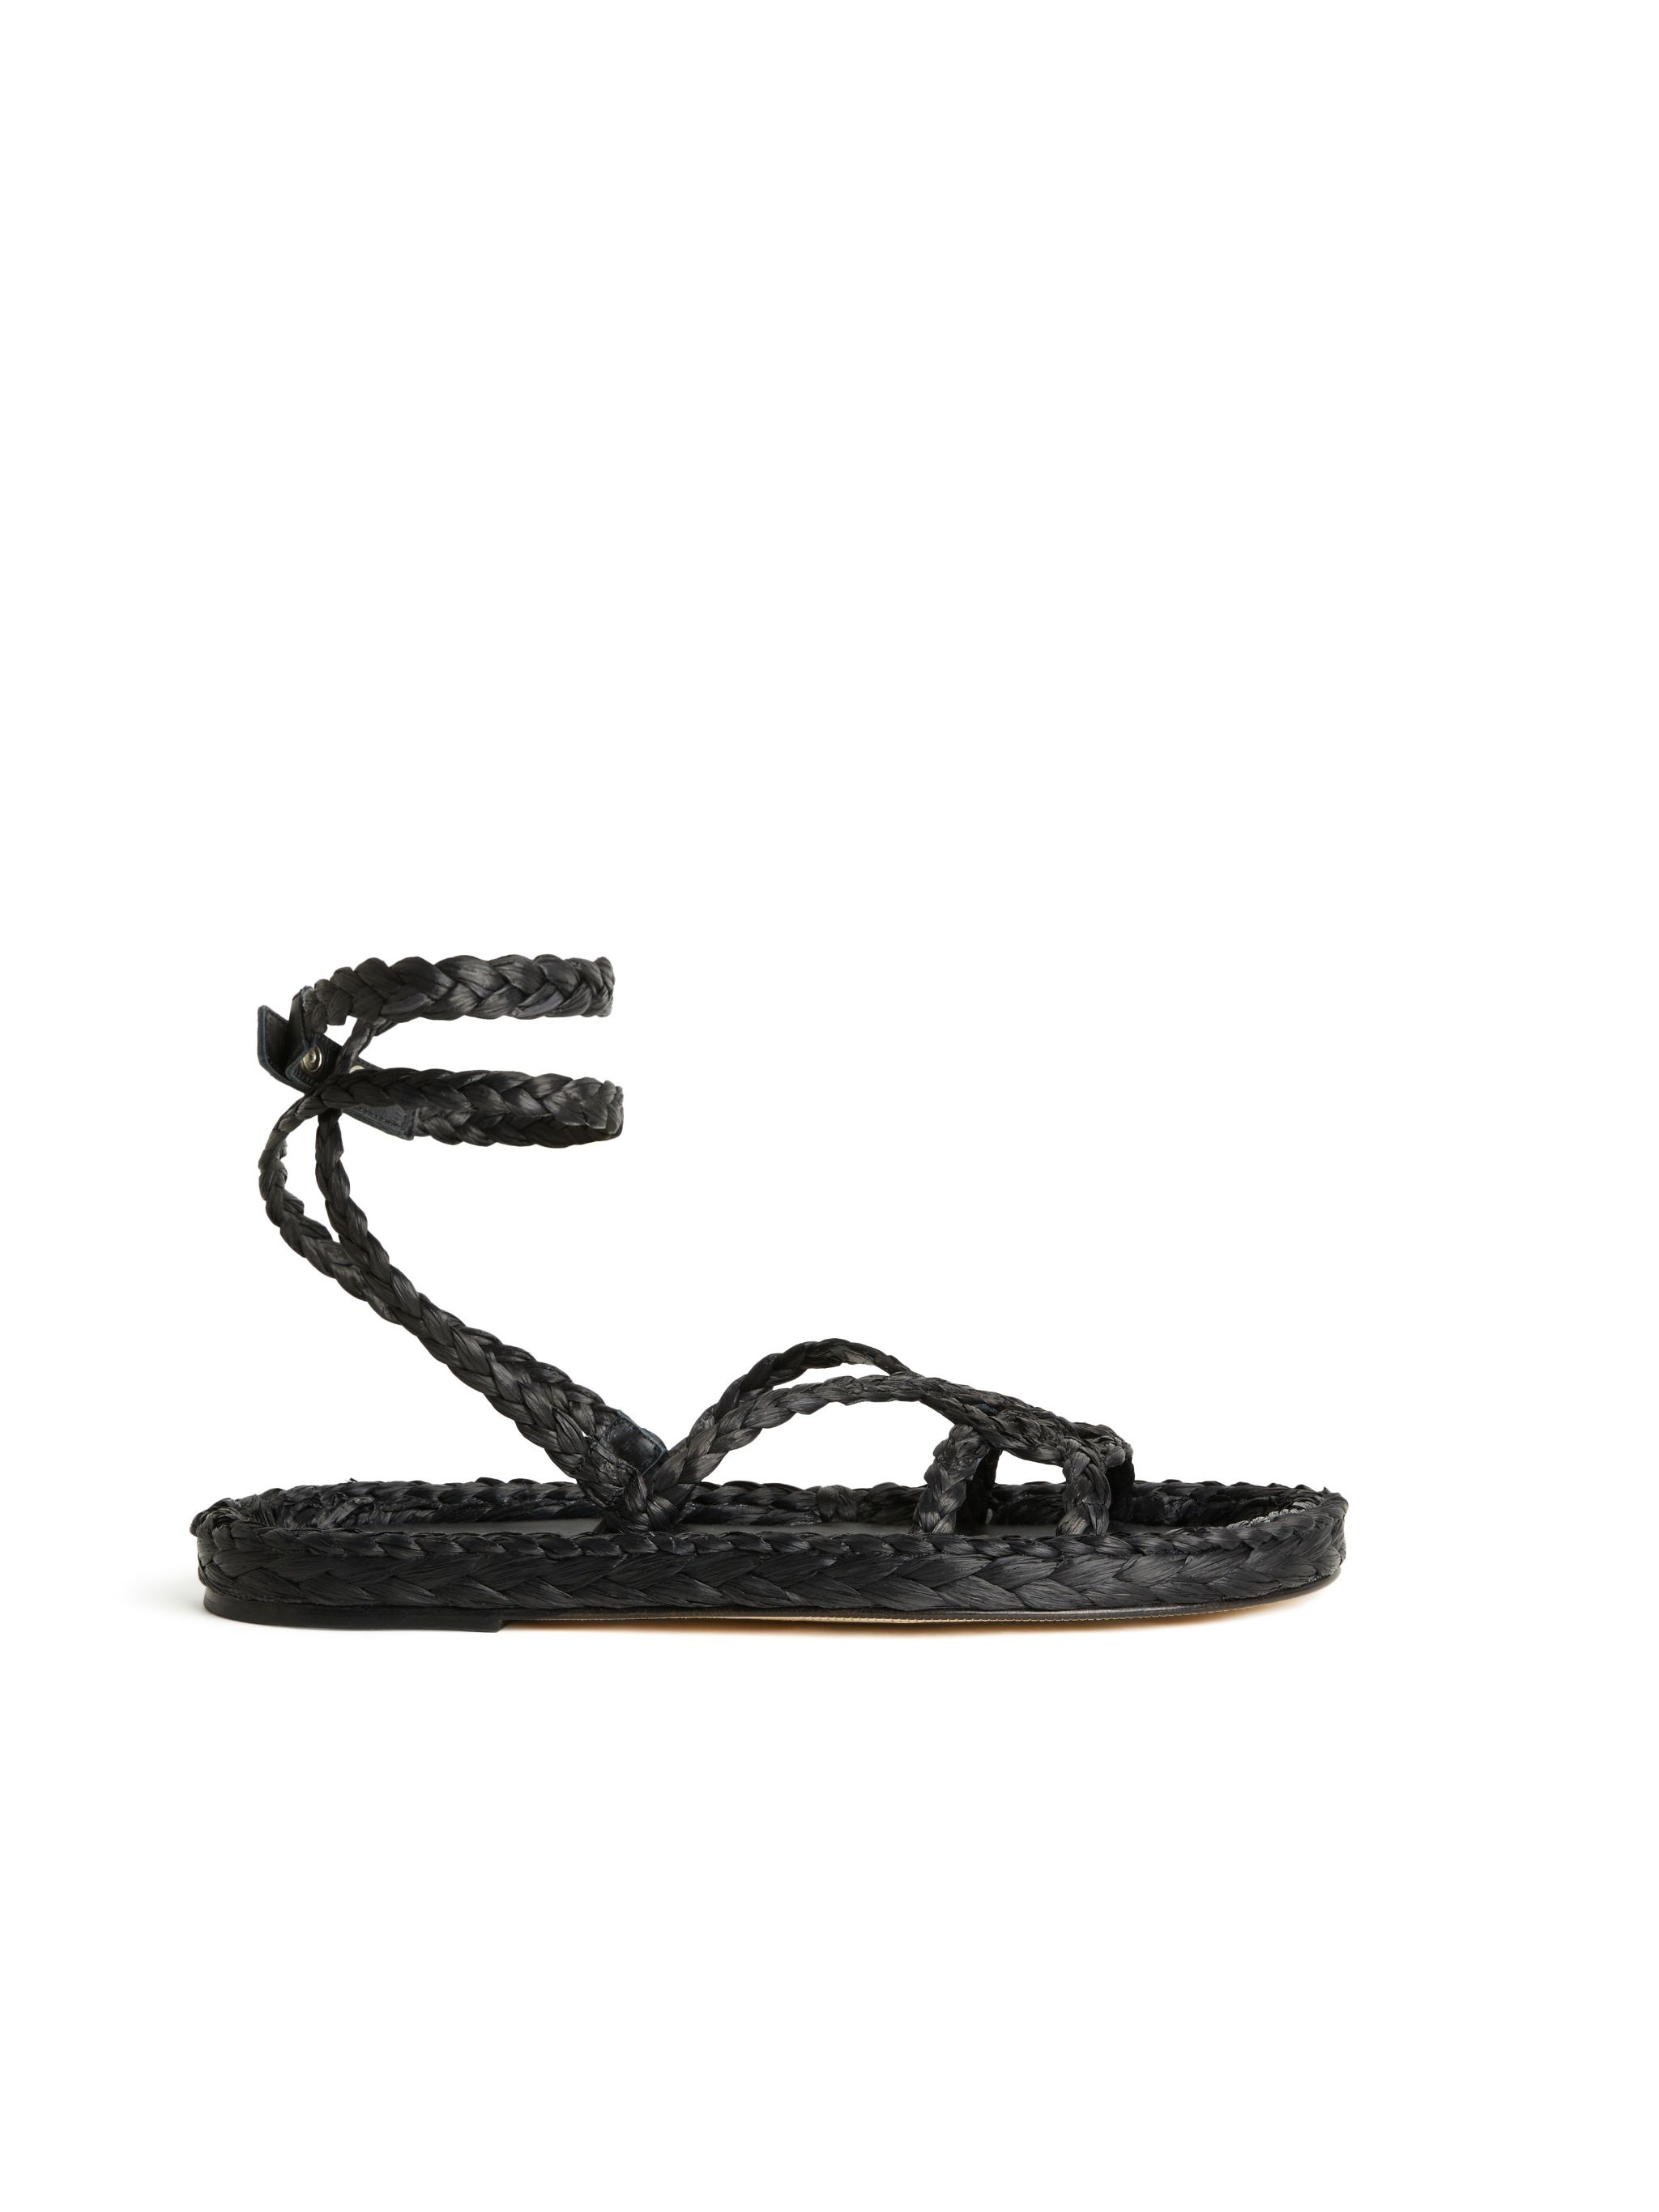 A Love Letter To India Sandals - 4